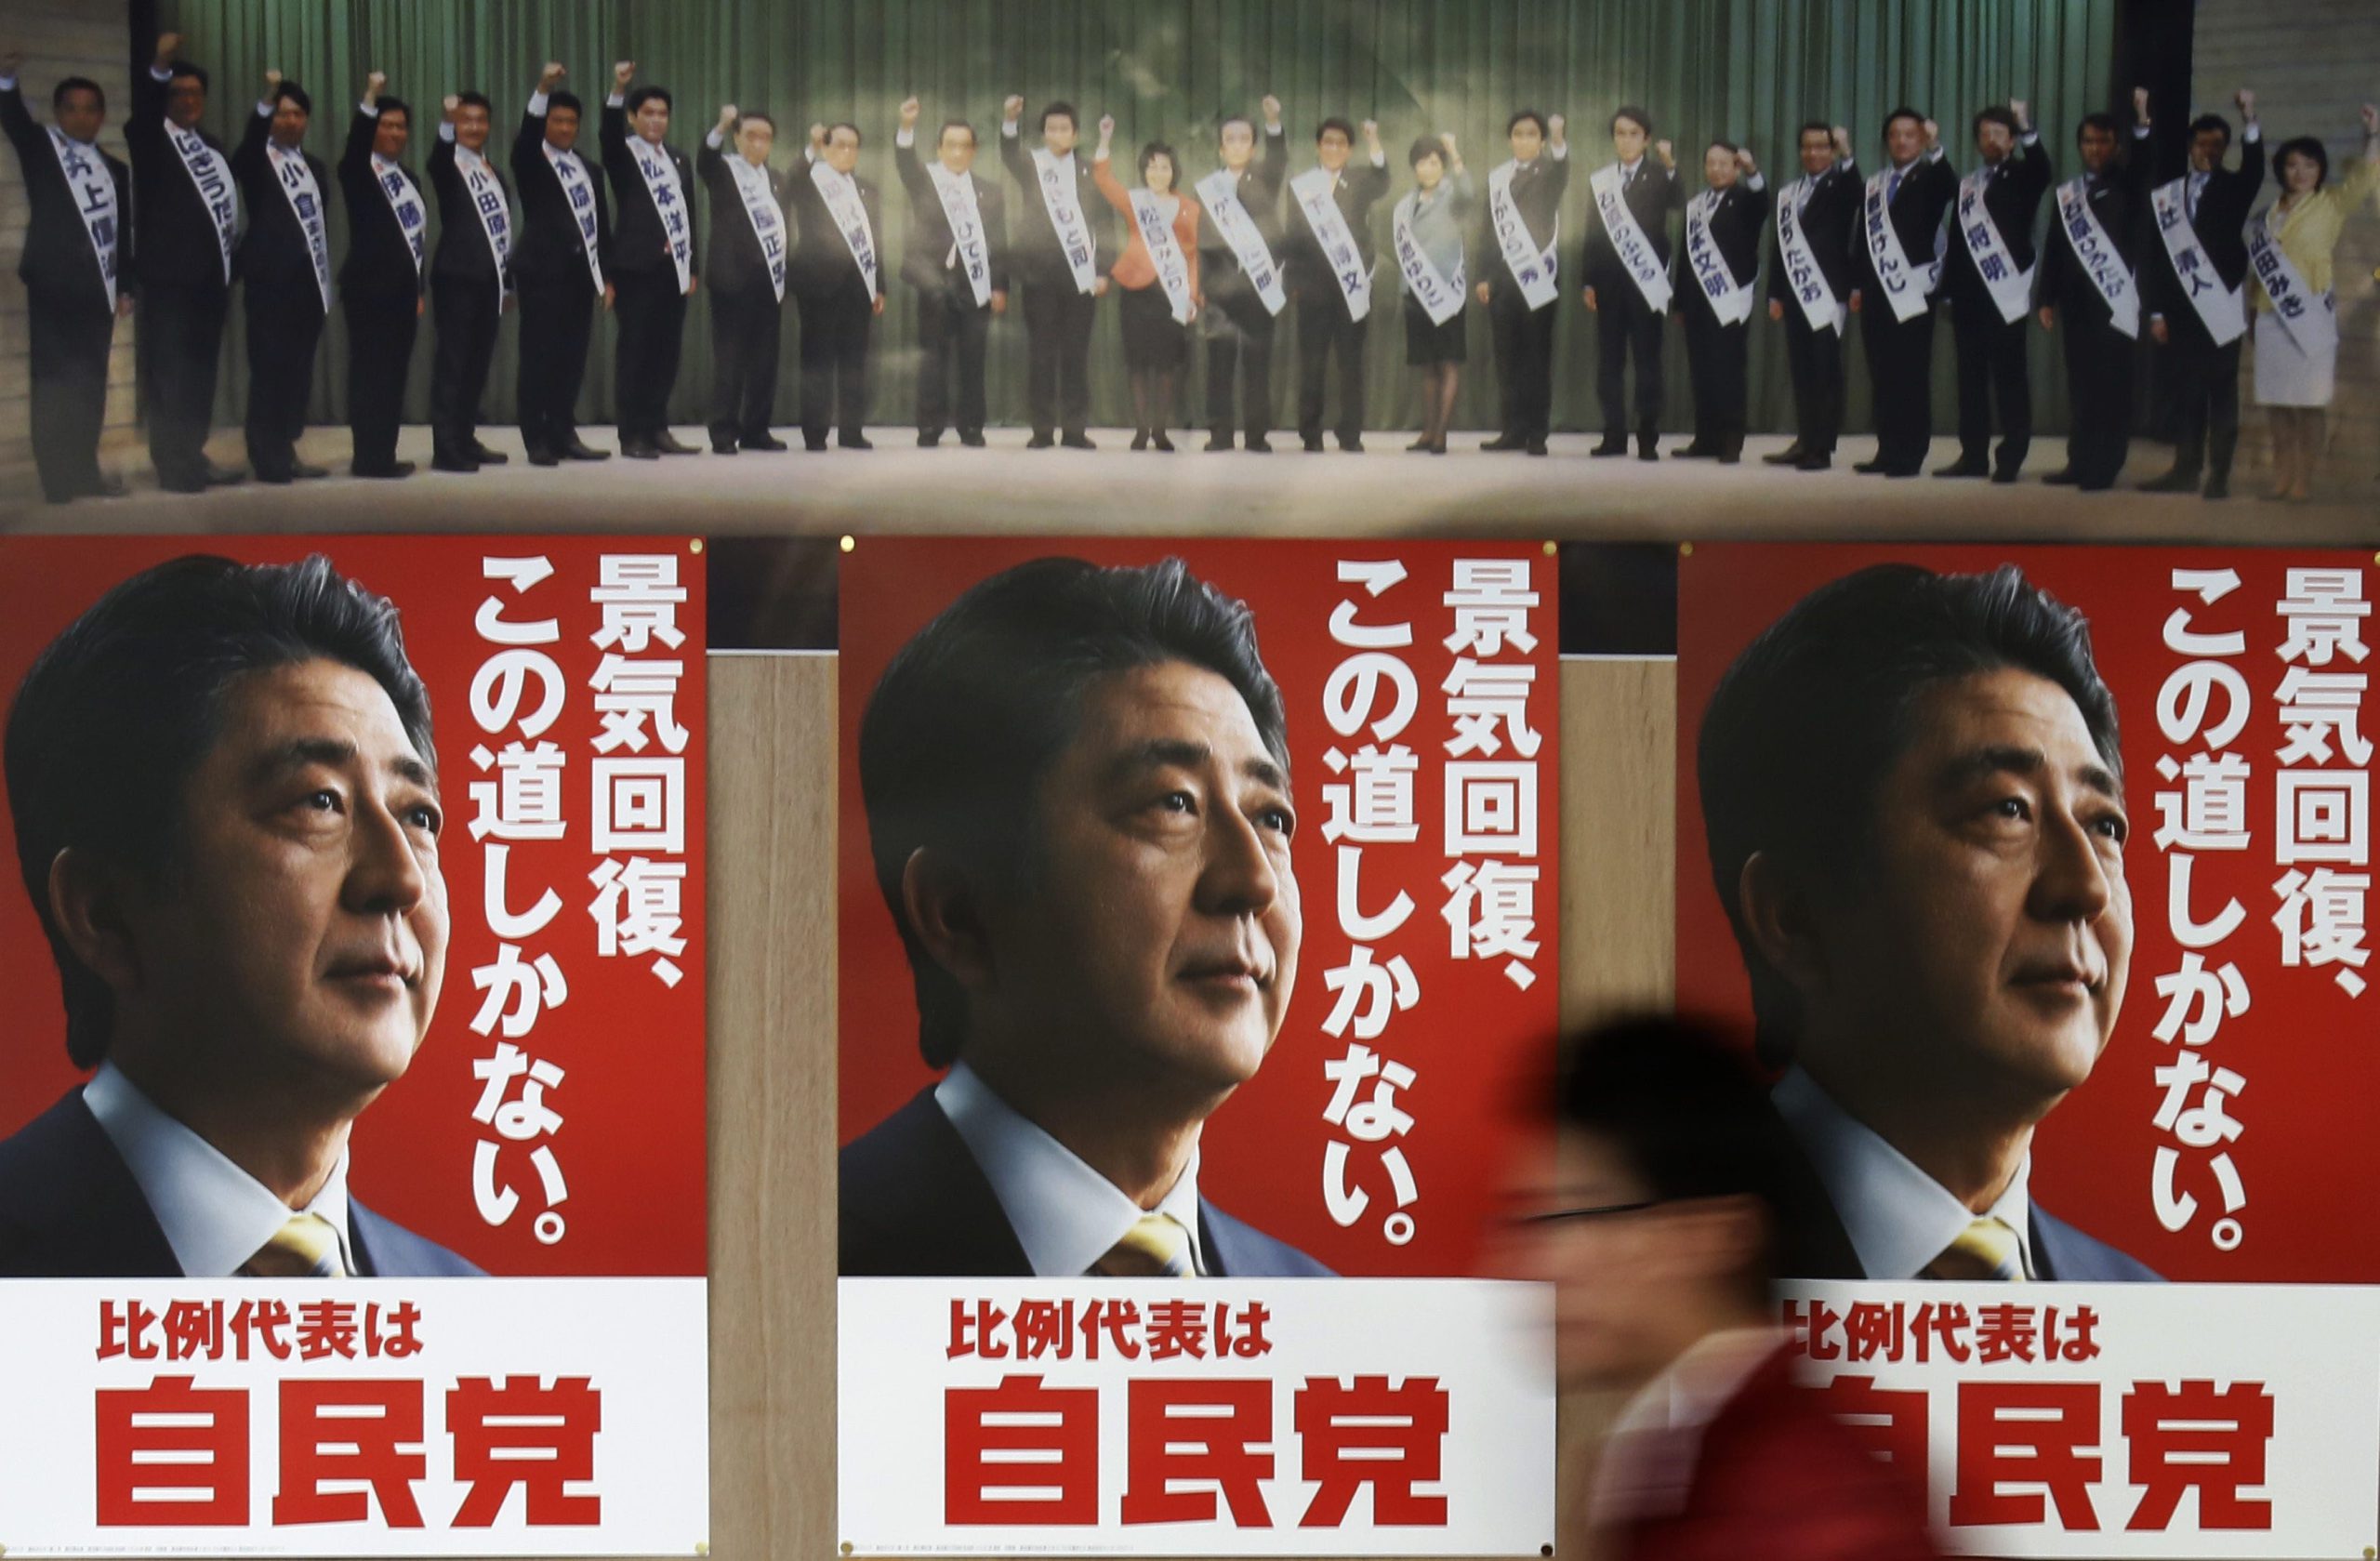 Staff member of Japan’s ruling Liberal Democratic Party walks past election campaign posters showing Japan’s Prime Minister Shinzo Abe at the LDP regional election office in Tokyo